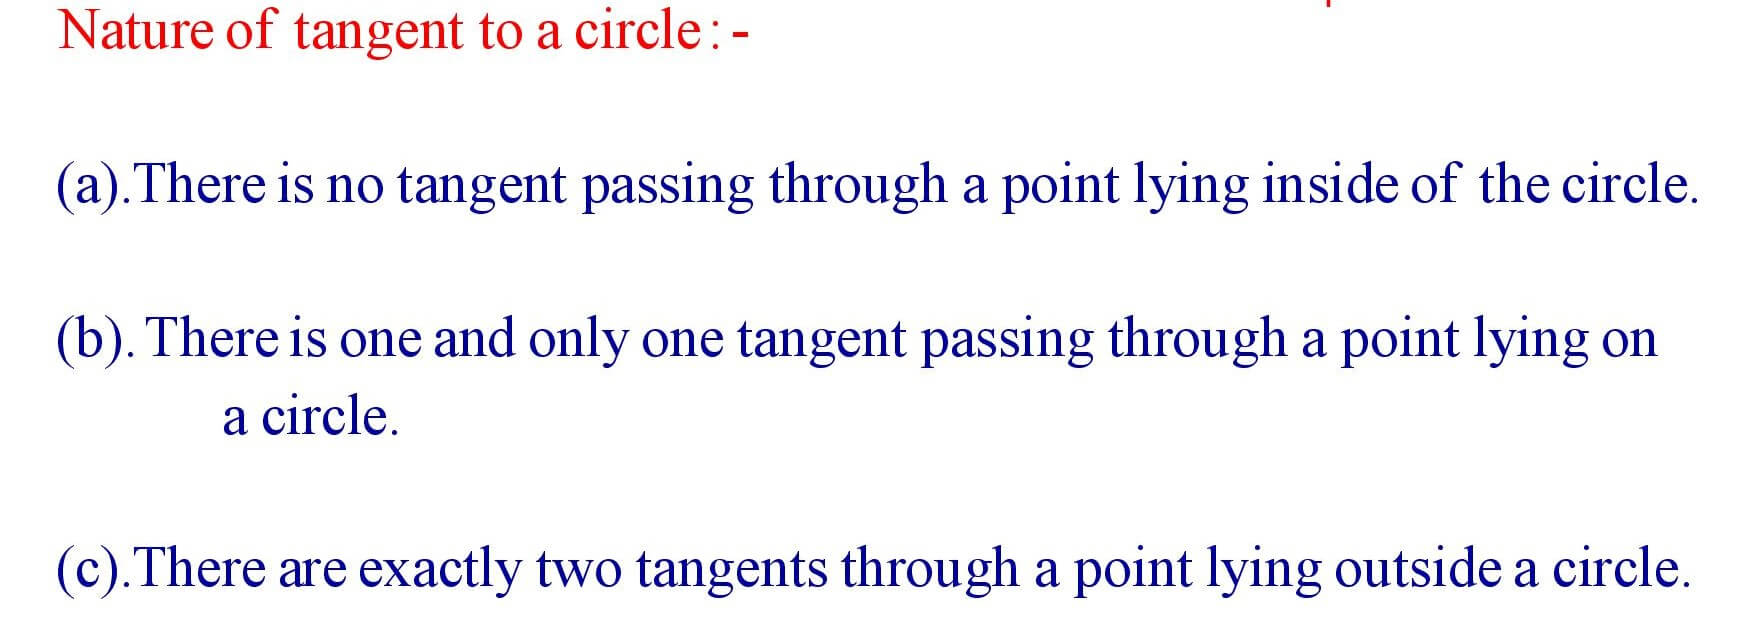 Nature of tangent to a circle